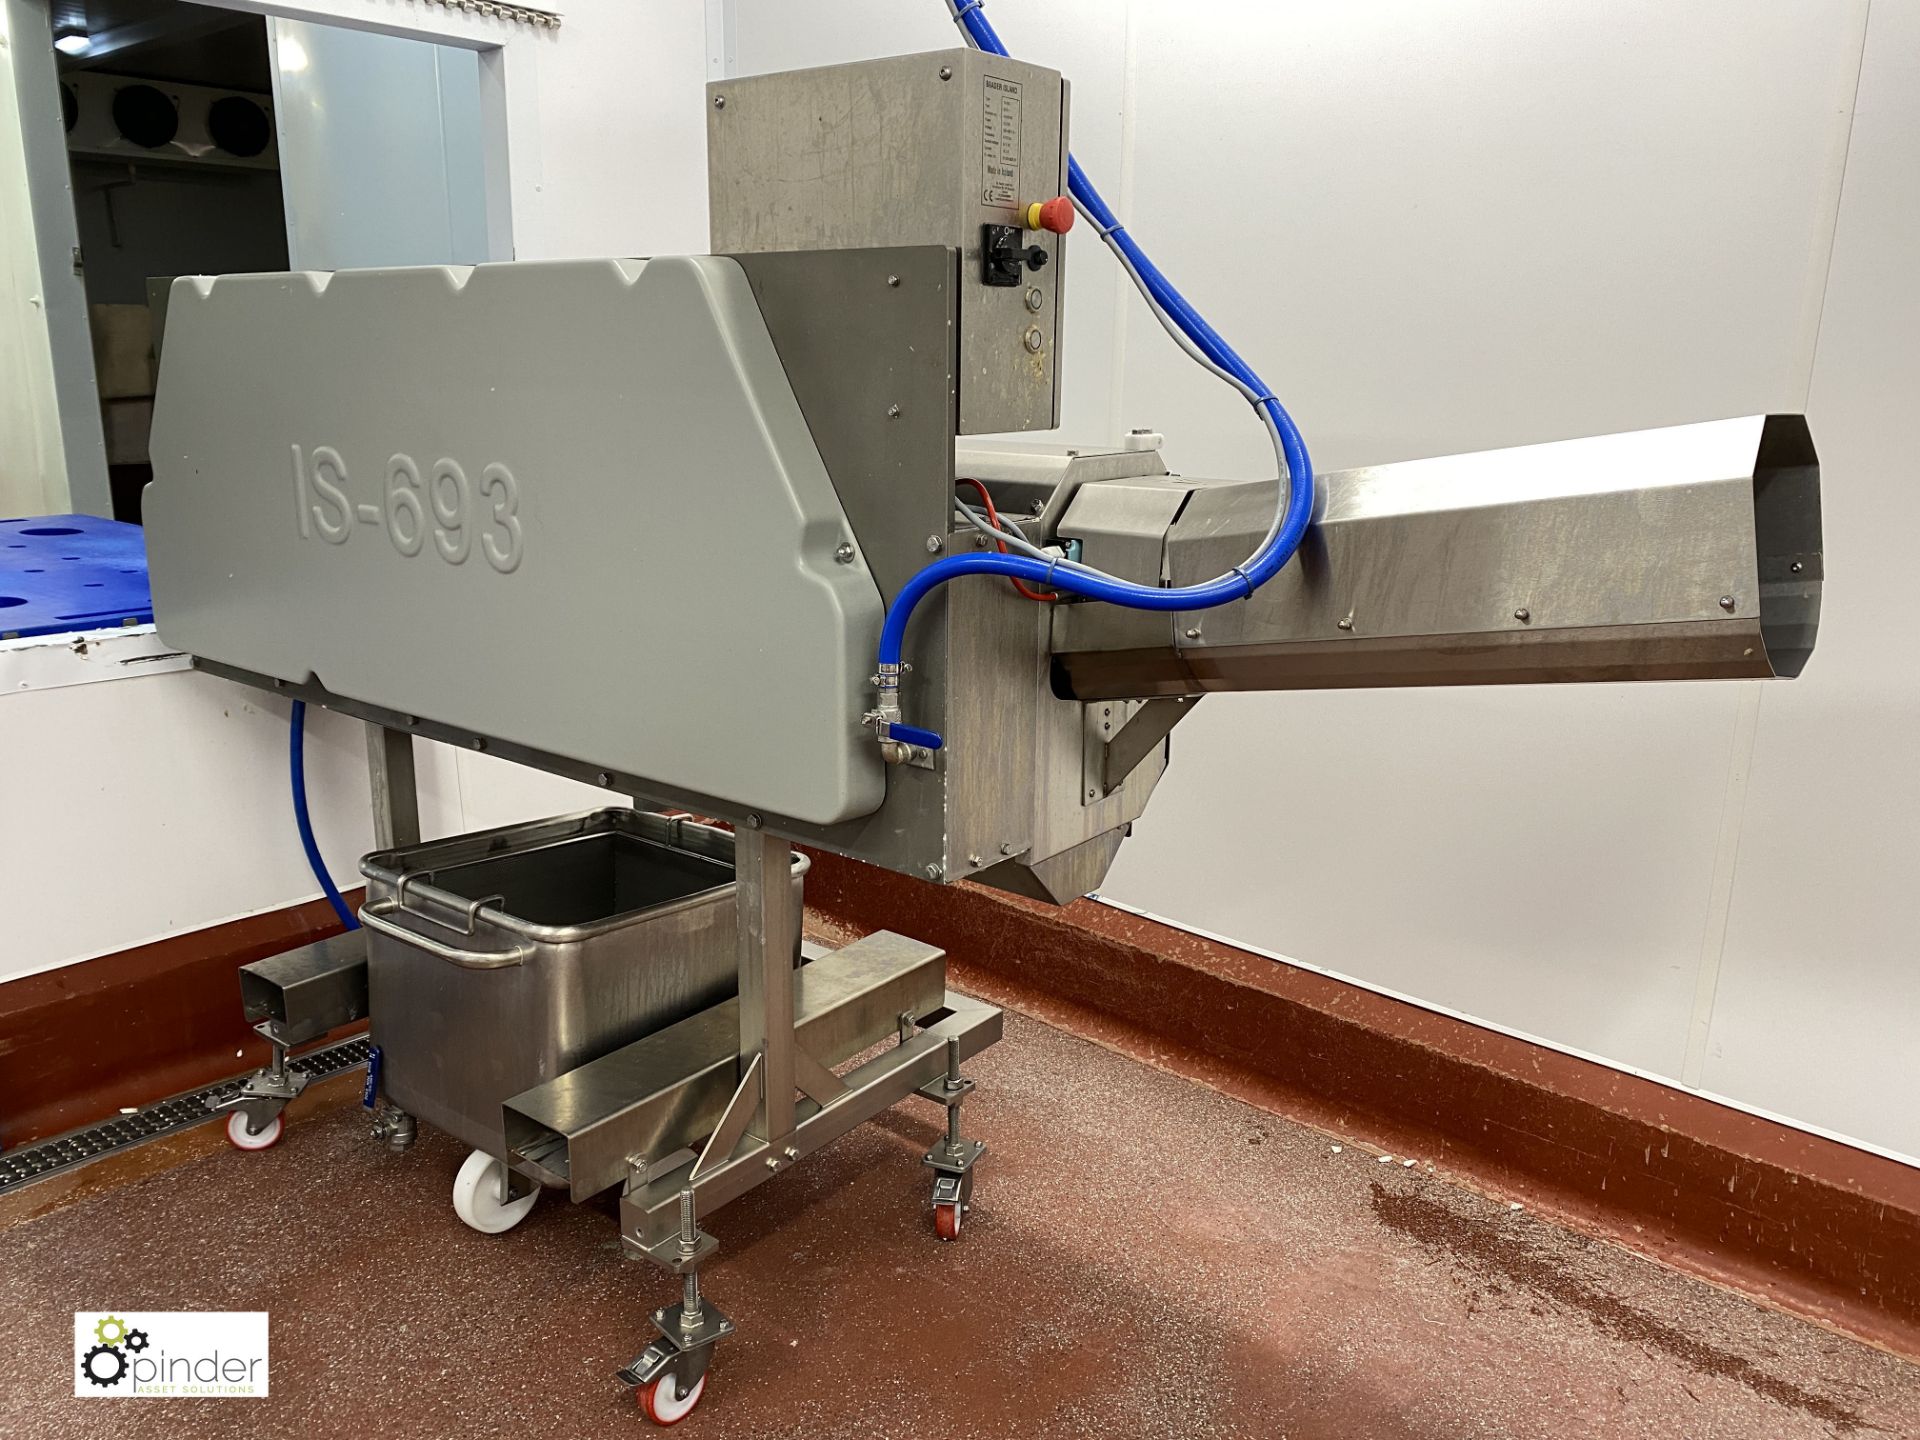 Baader Island IS-693 high speed Fish Descaler used for salmon, year 2019, serial number 49-693-01 (